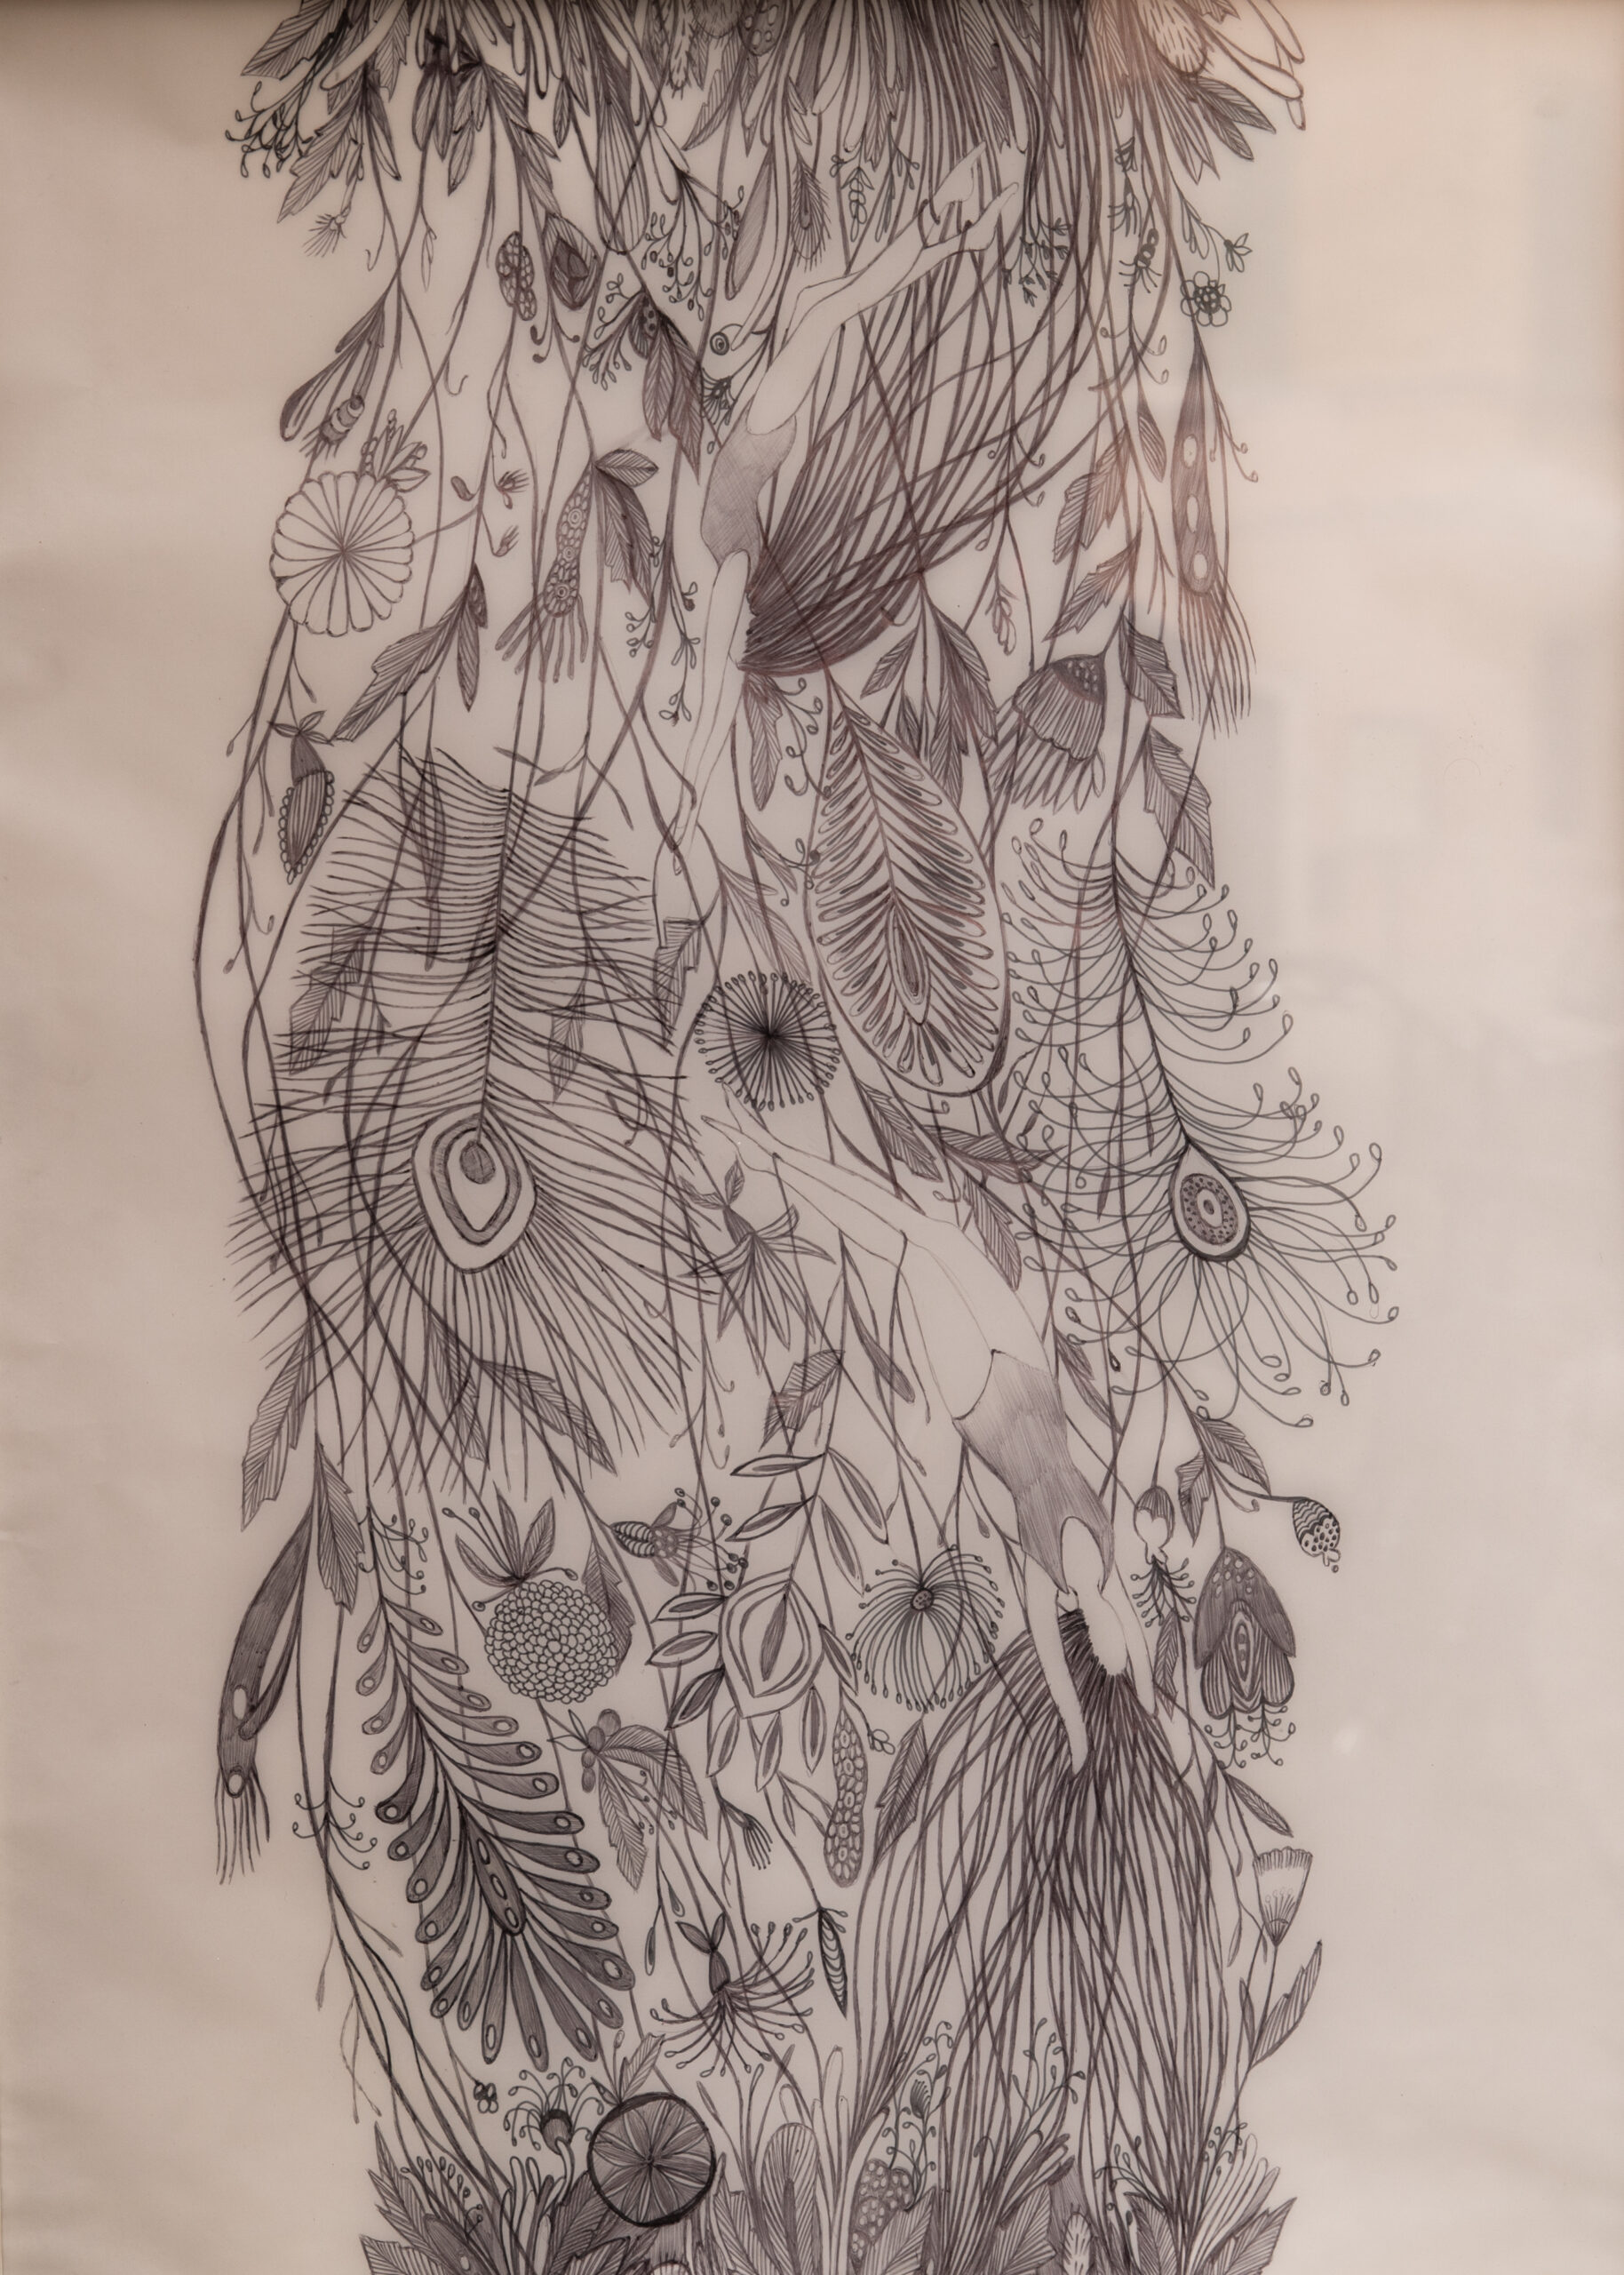 Cascata naturale, bic on tracing sheet, drawing., 60x80cm, 2017.|